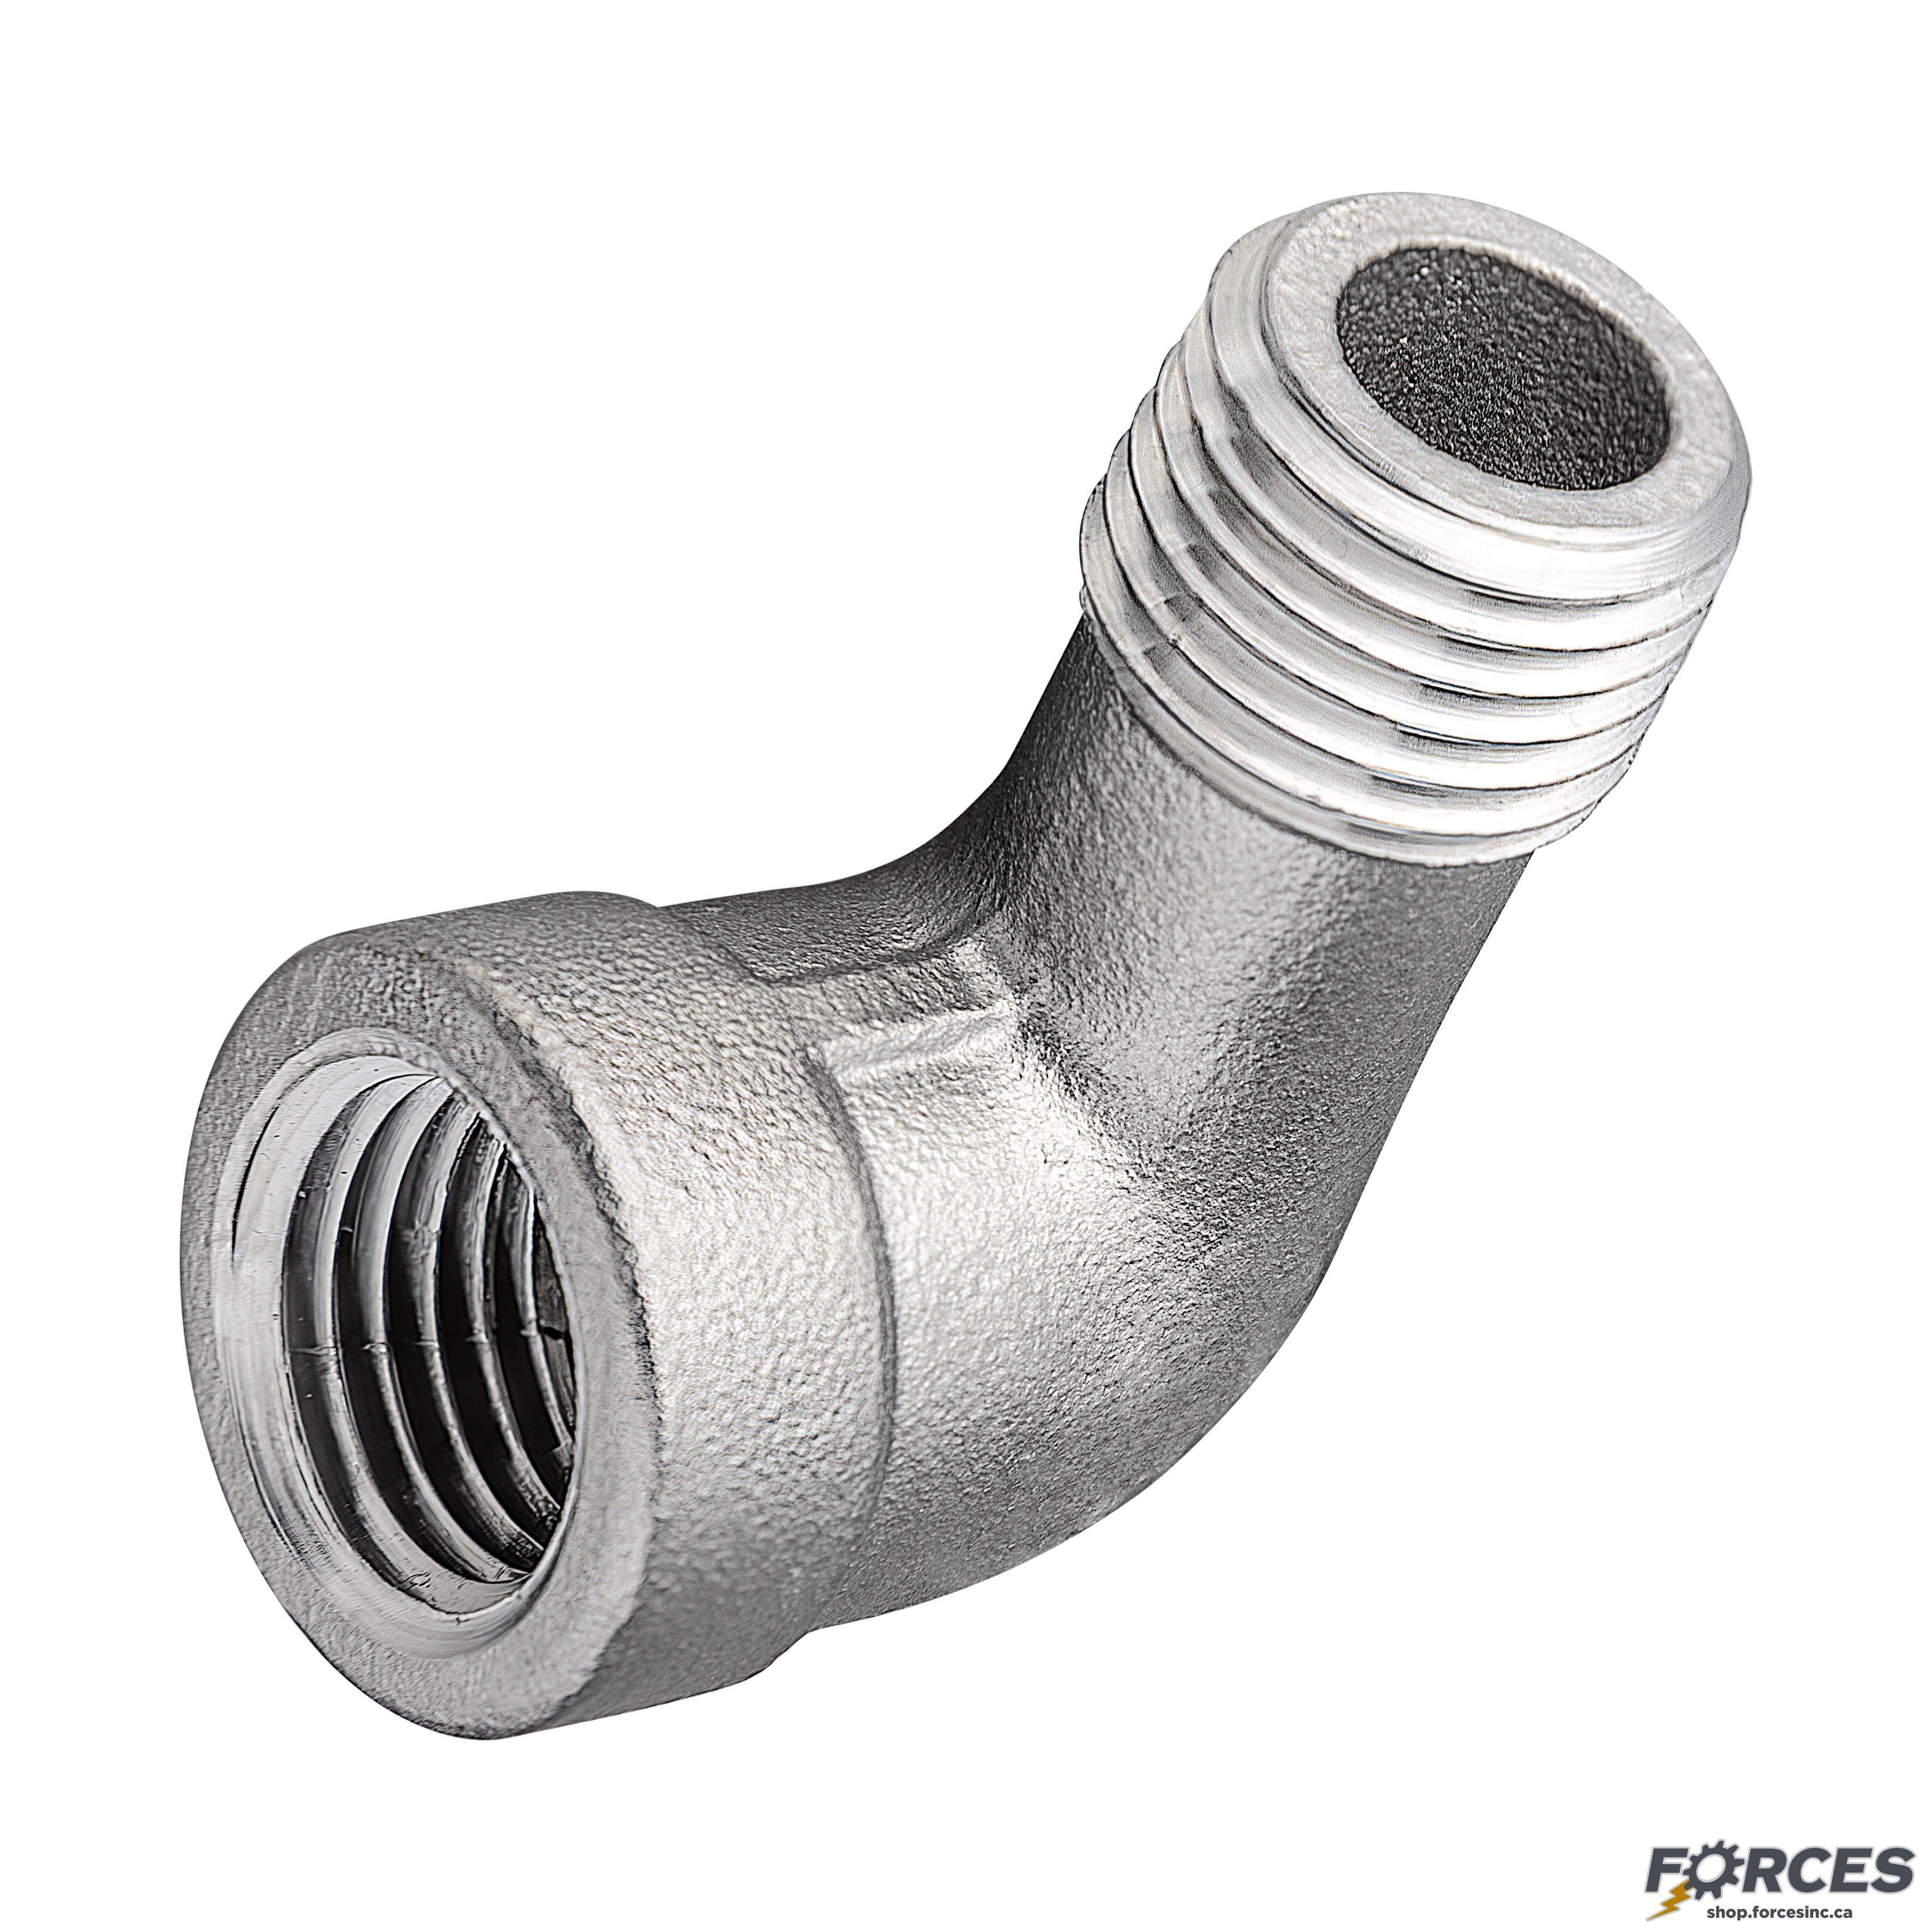 1-1/2" Street Elbow 90° NPT #150 - Stainless Steel 316 - Forces Inc